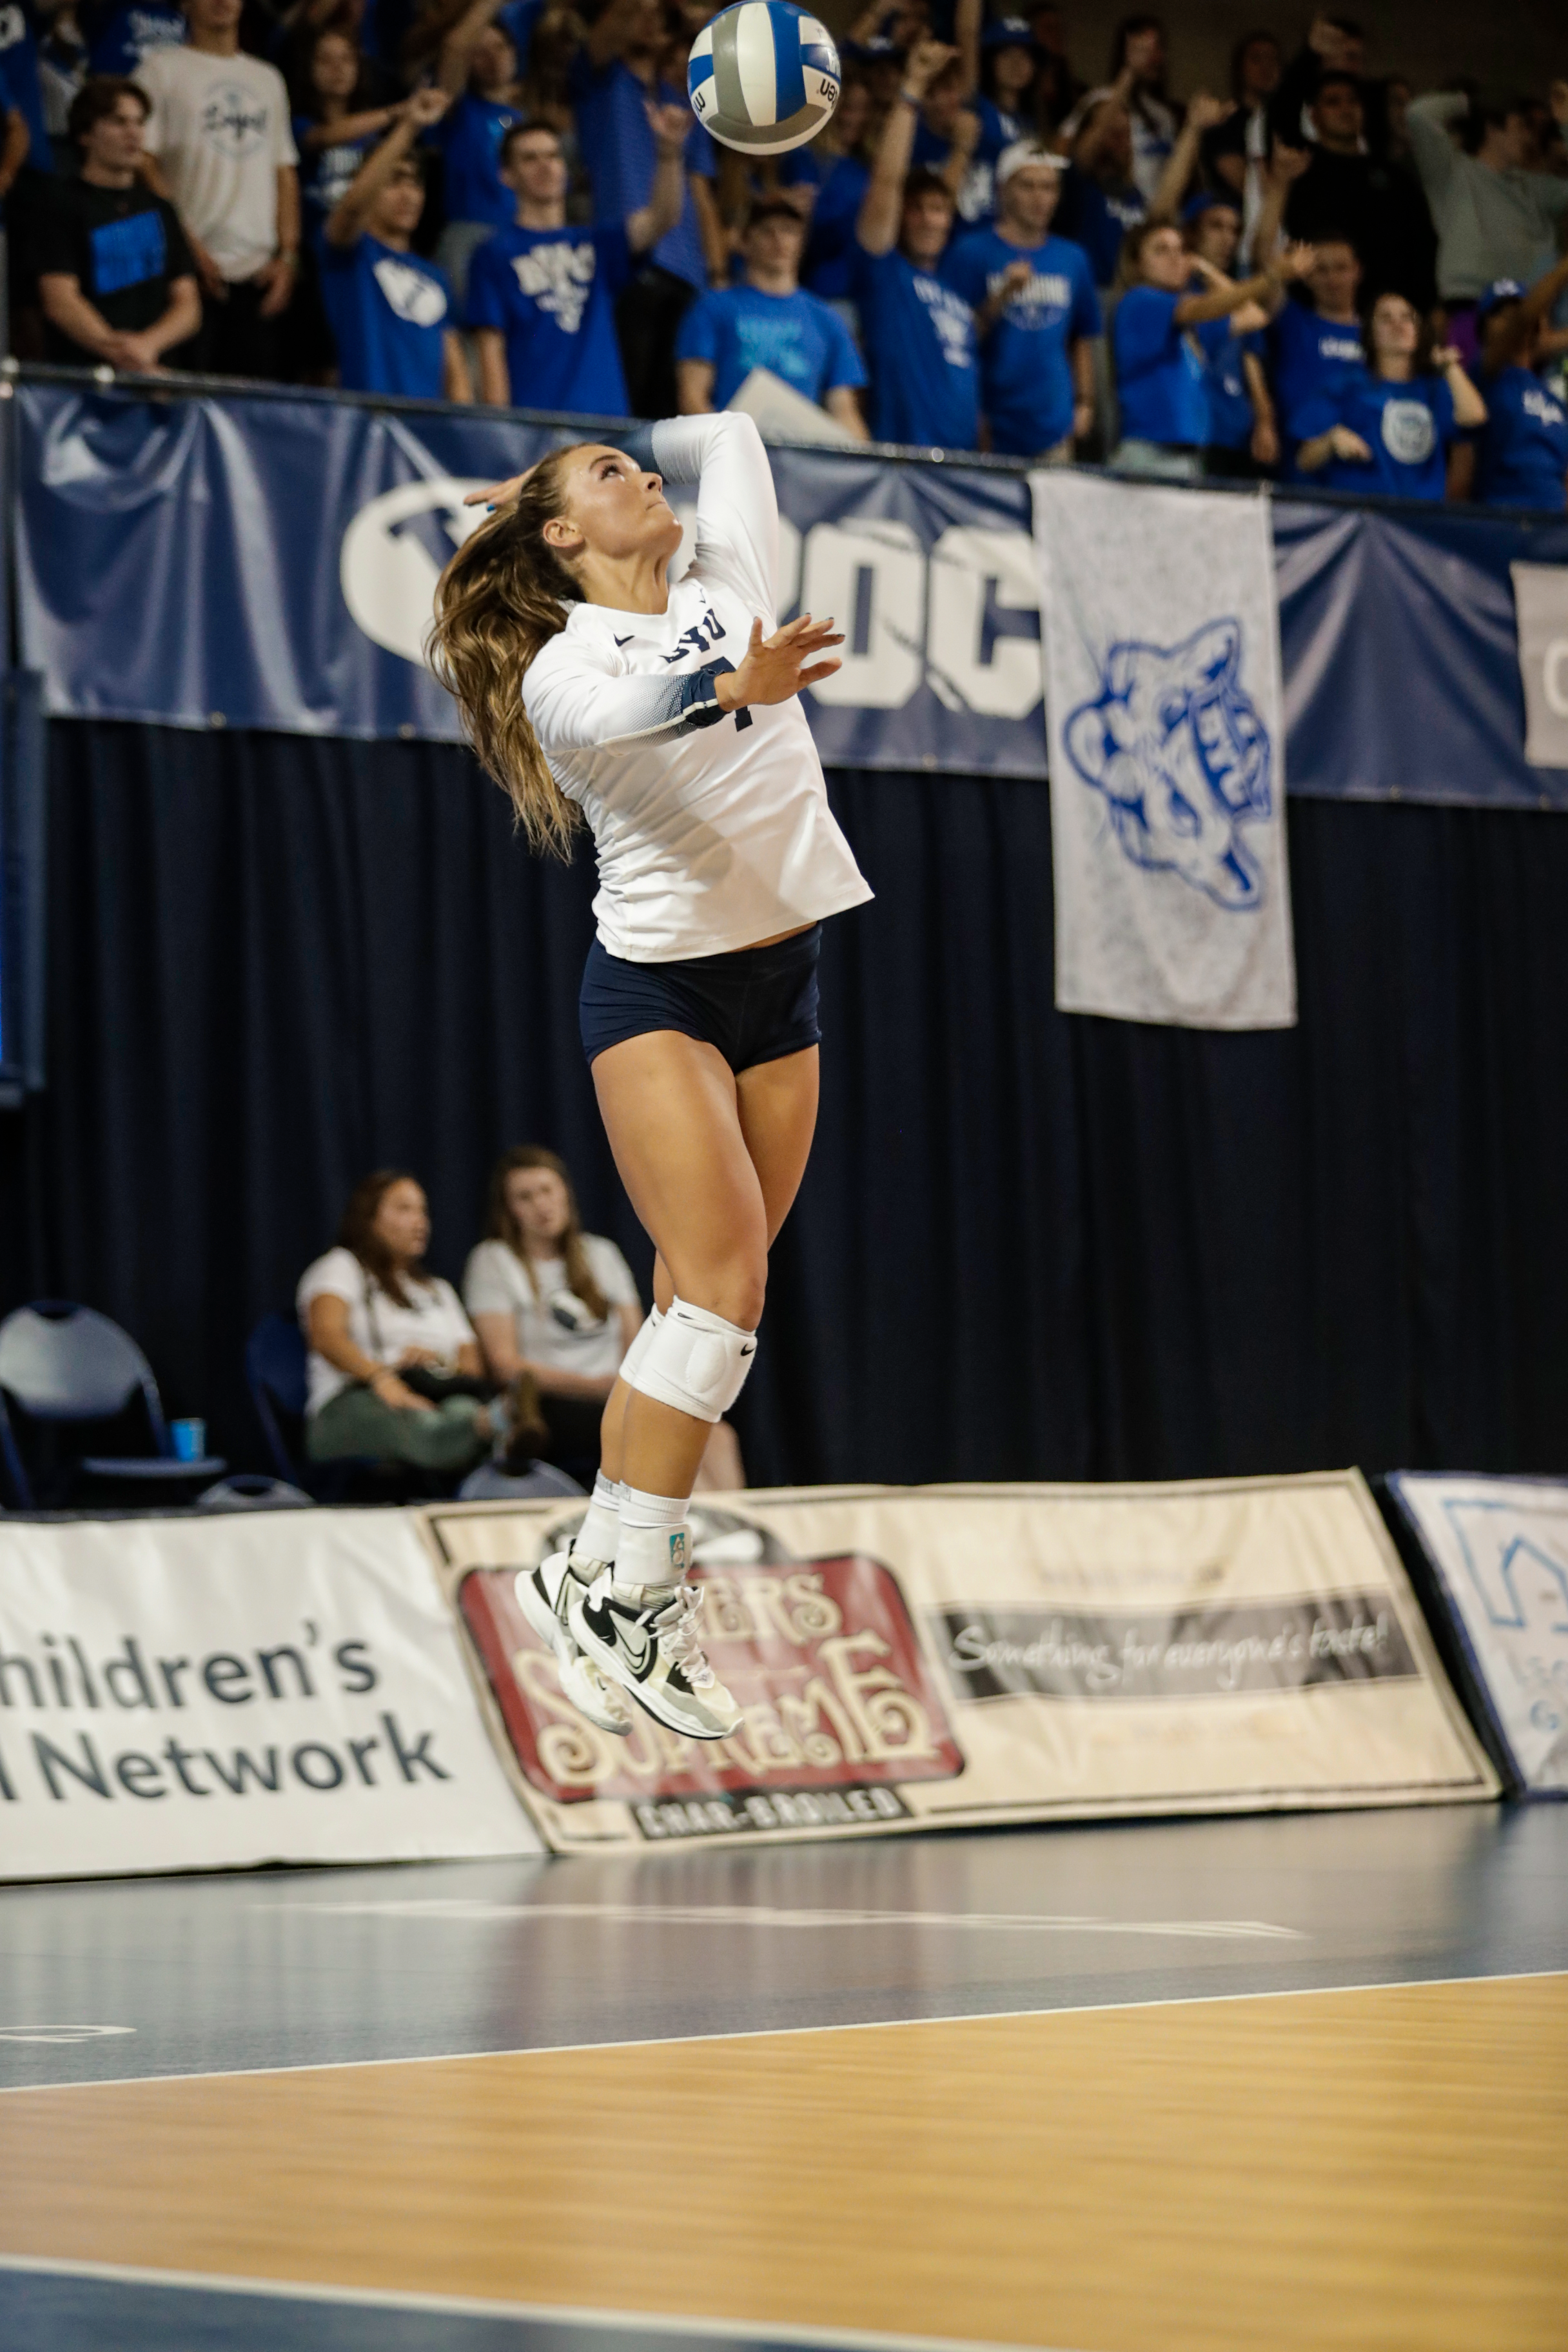 Whitney Bower serves during a game against LMU.